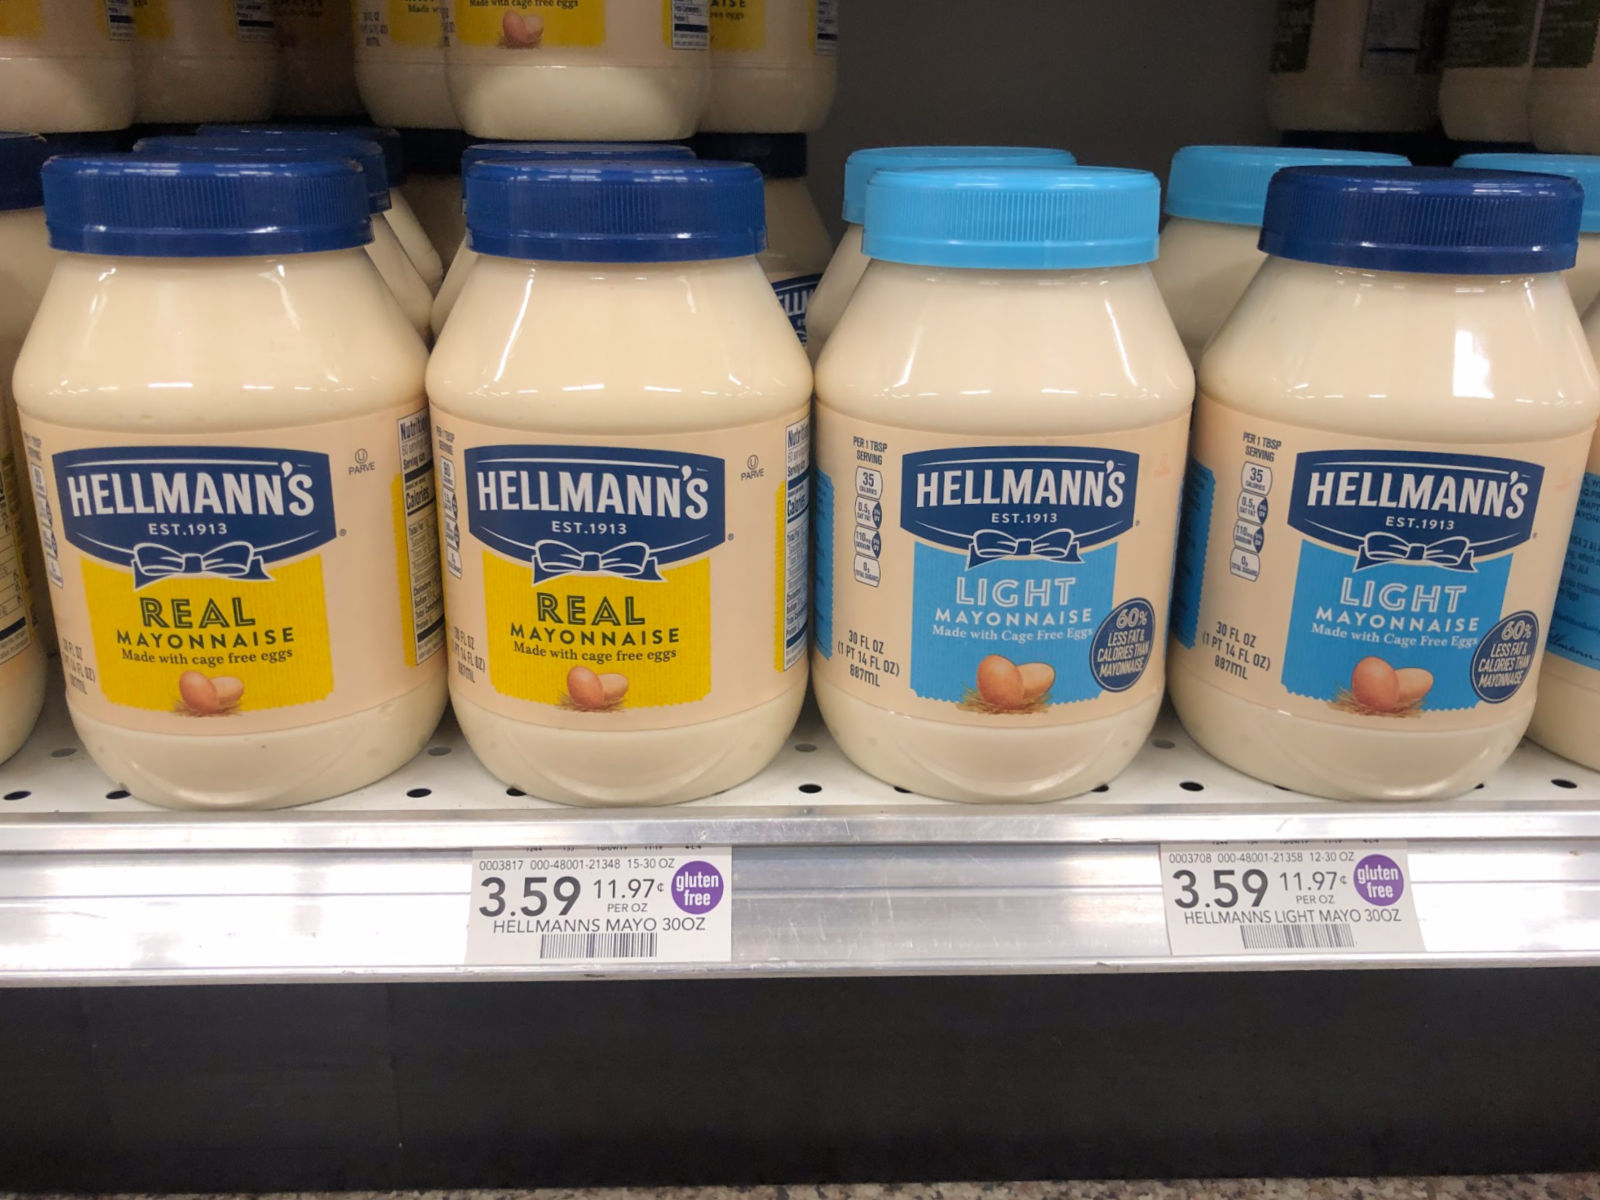 Big Savings On Hellmann’s® Real Mayonnaise - Get Great Taste For All Your Favorite Holiday Recipes! on I Heart Publix